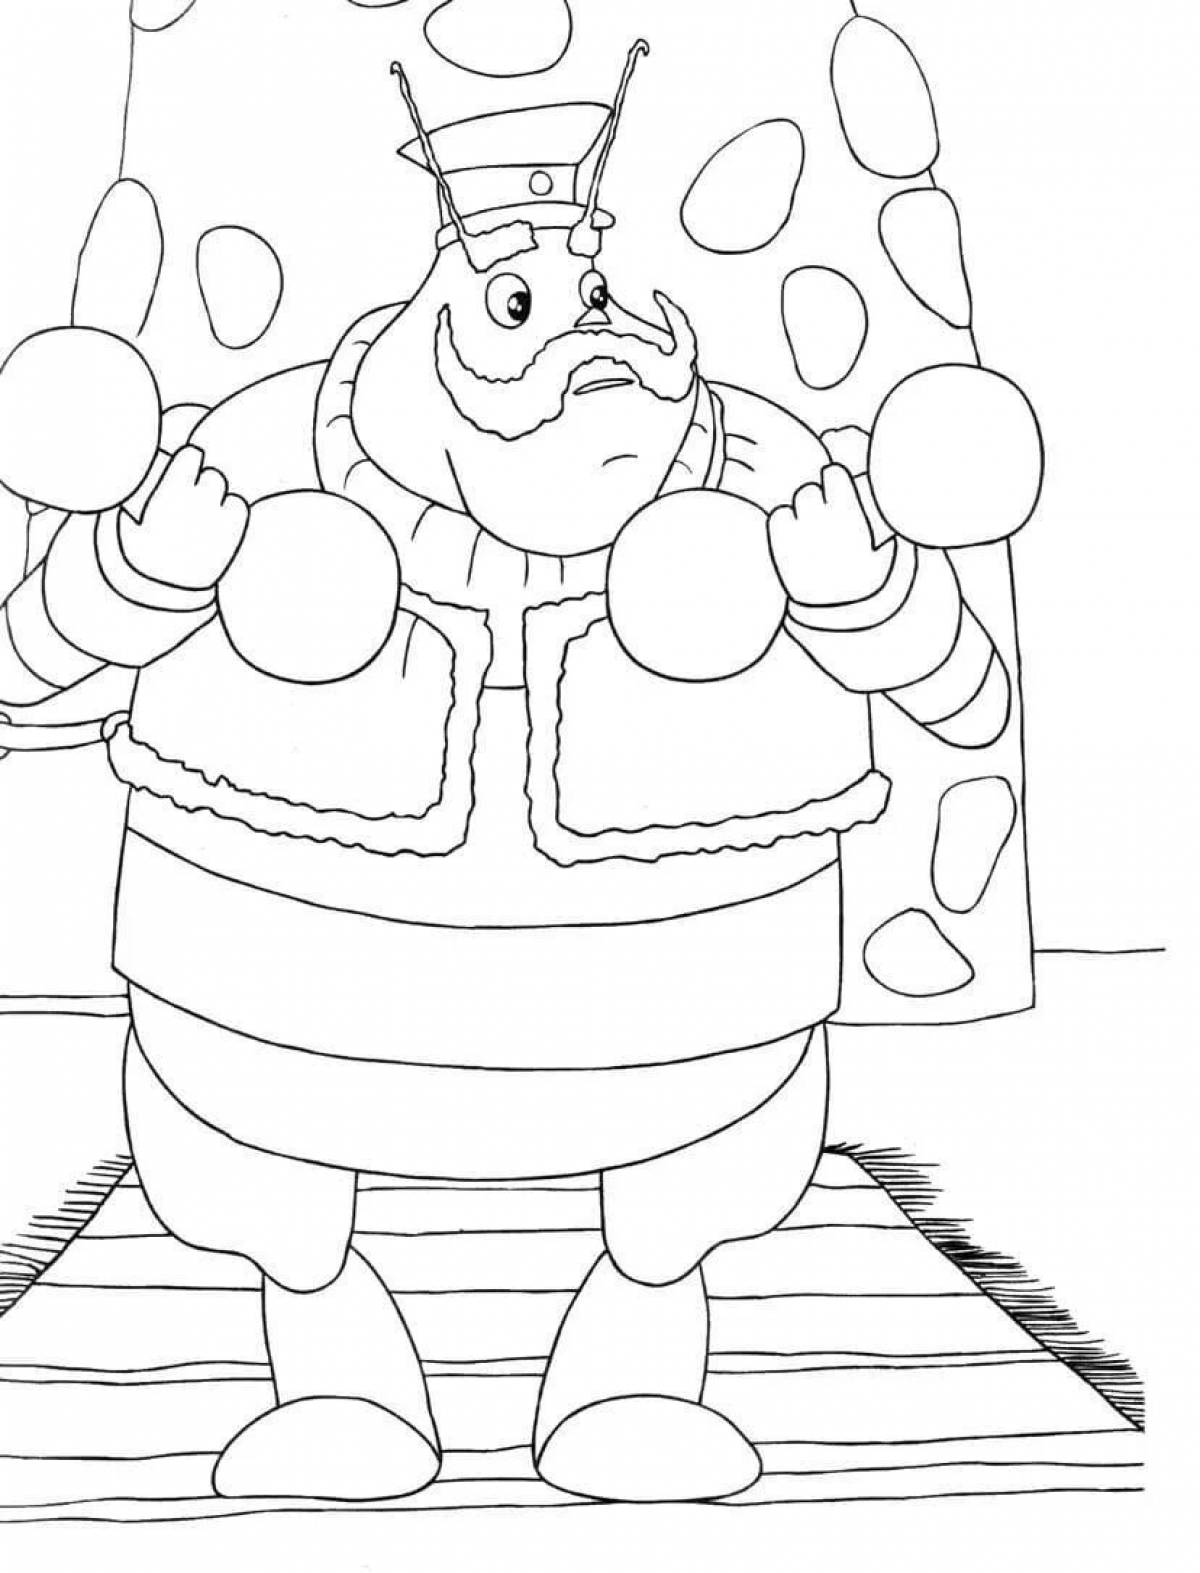 Colorful grandfather coloring page